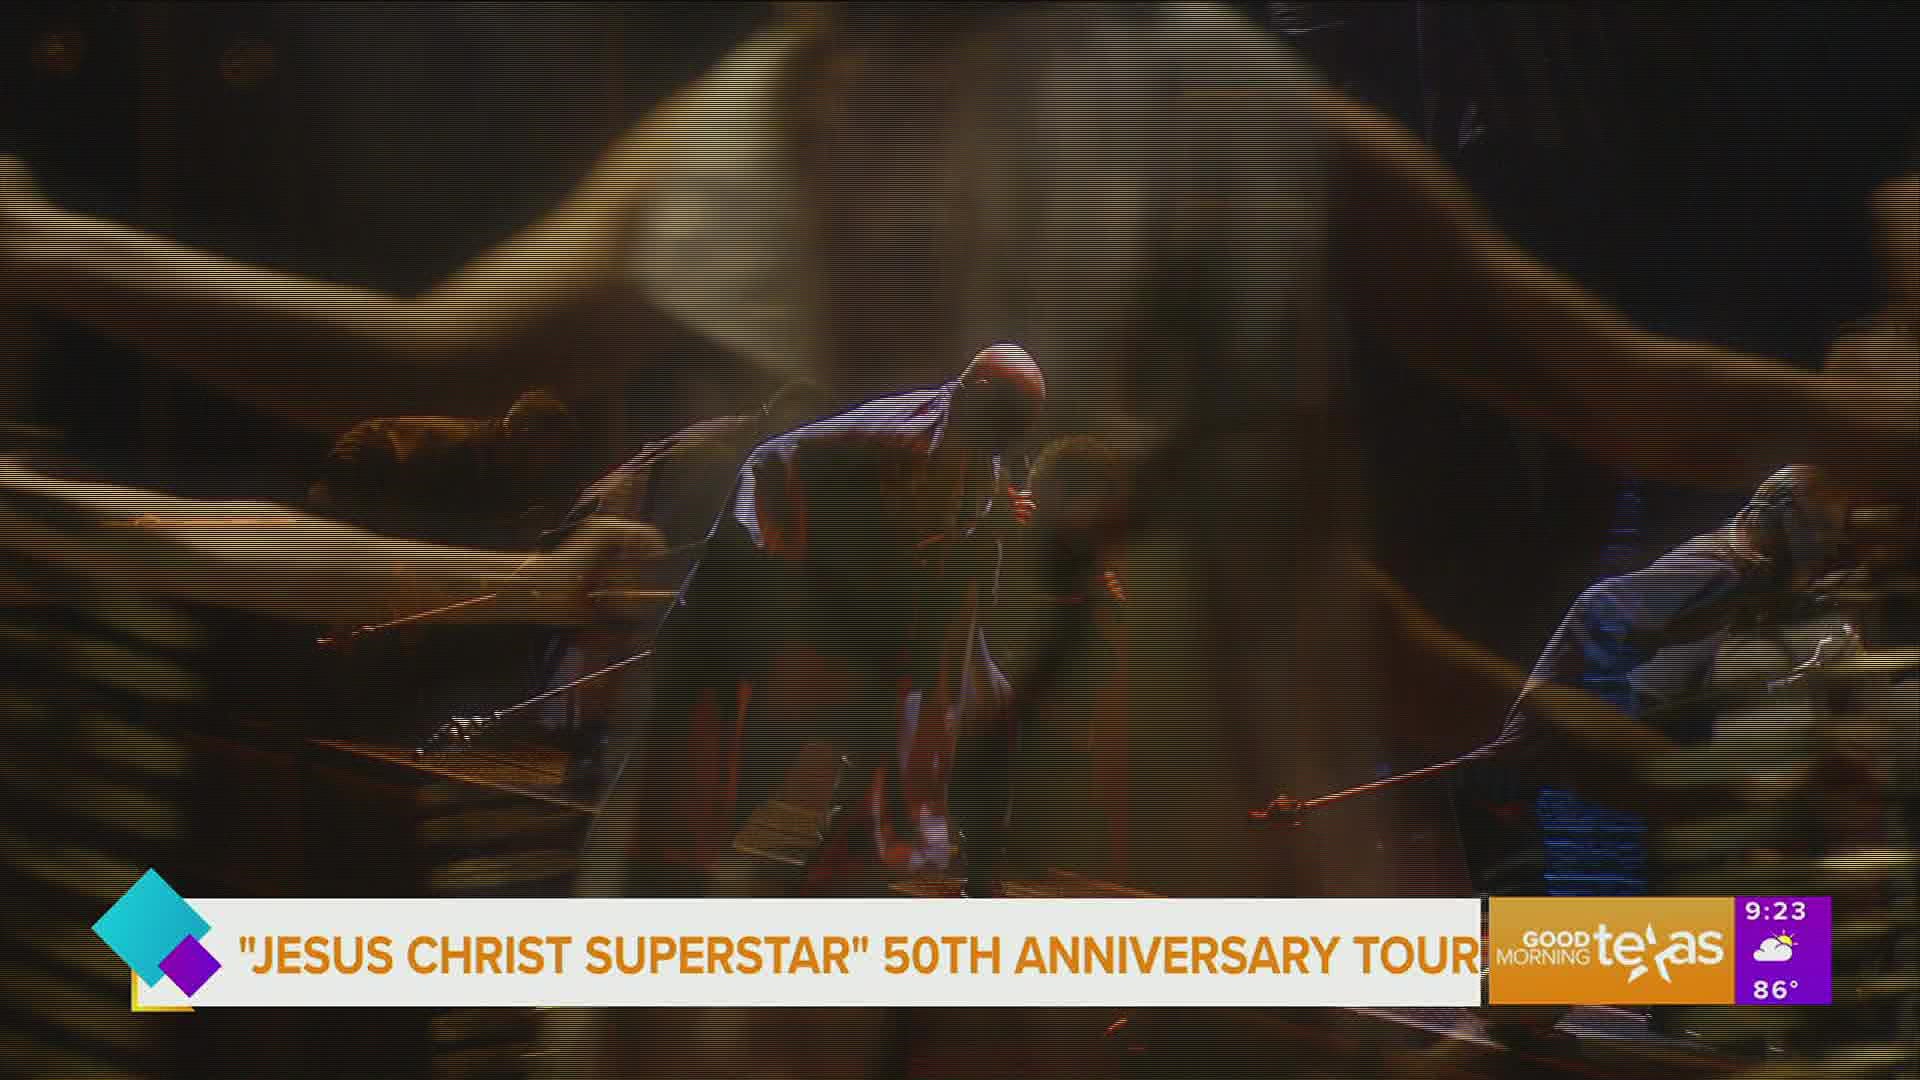 “Jesus Christ Superstar” celebrates 50 years with a stop in Fort Worth at Bass Performance Hall!
We'll talk to some of the cast members.